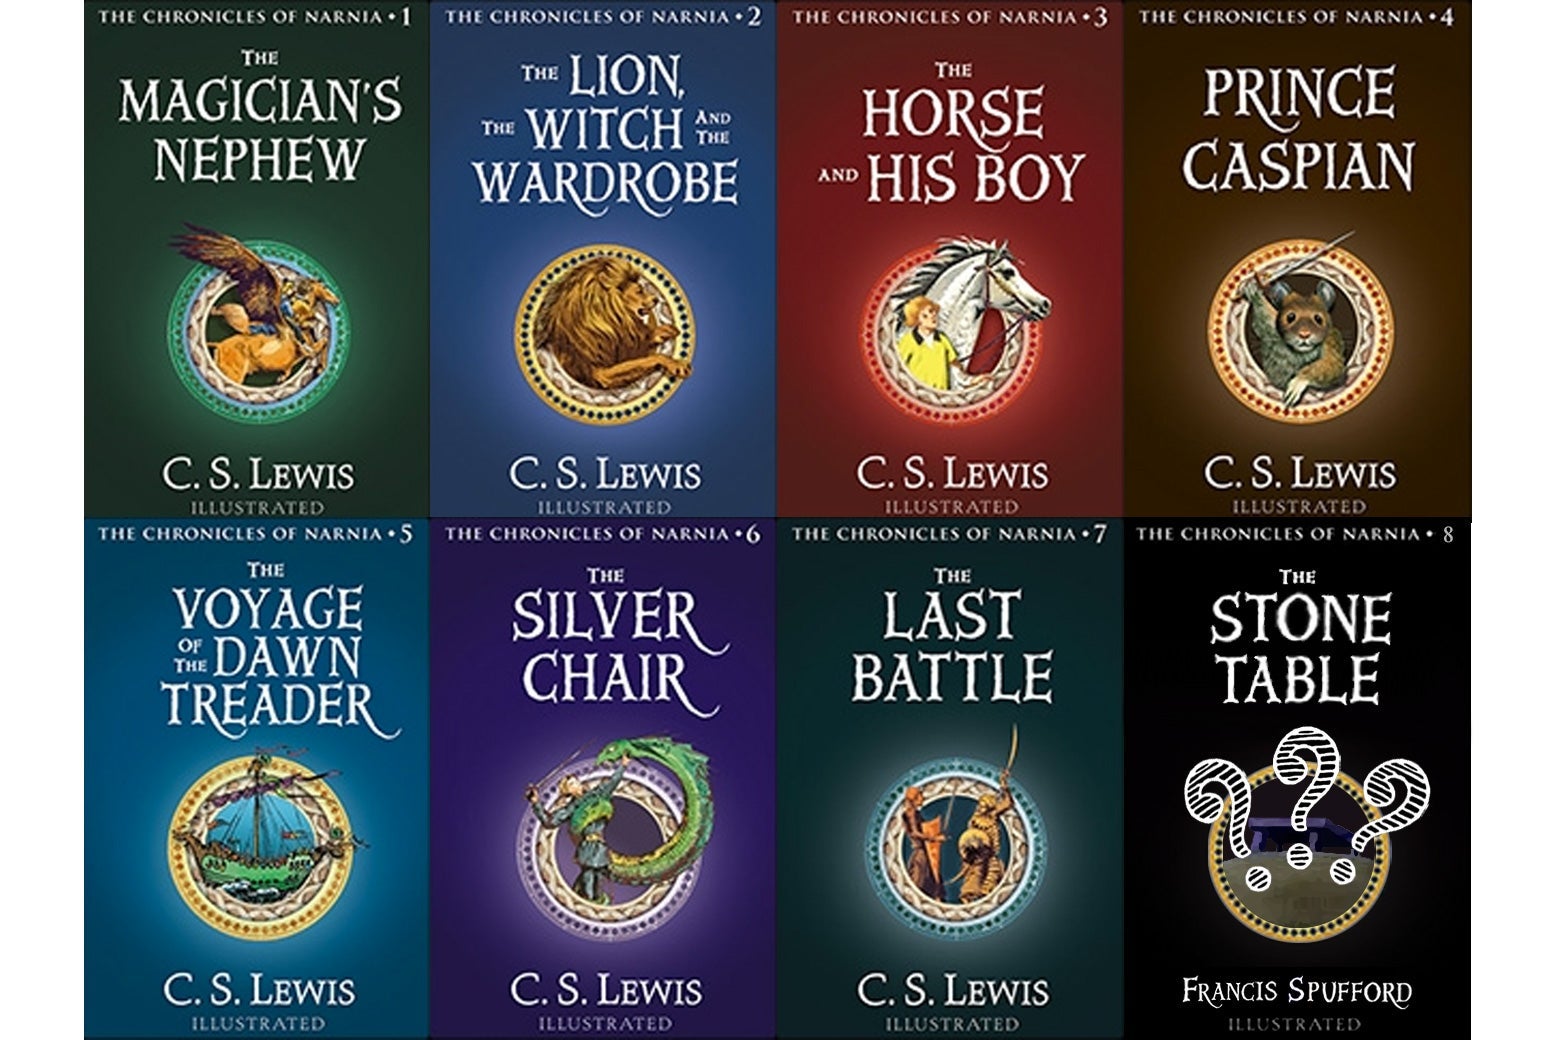 The seven original book covers of The Chronicles of Narnia, plus a mockup of a cover for an eighth, titled The Stone Table, by Francis Spufford.